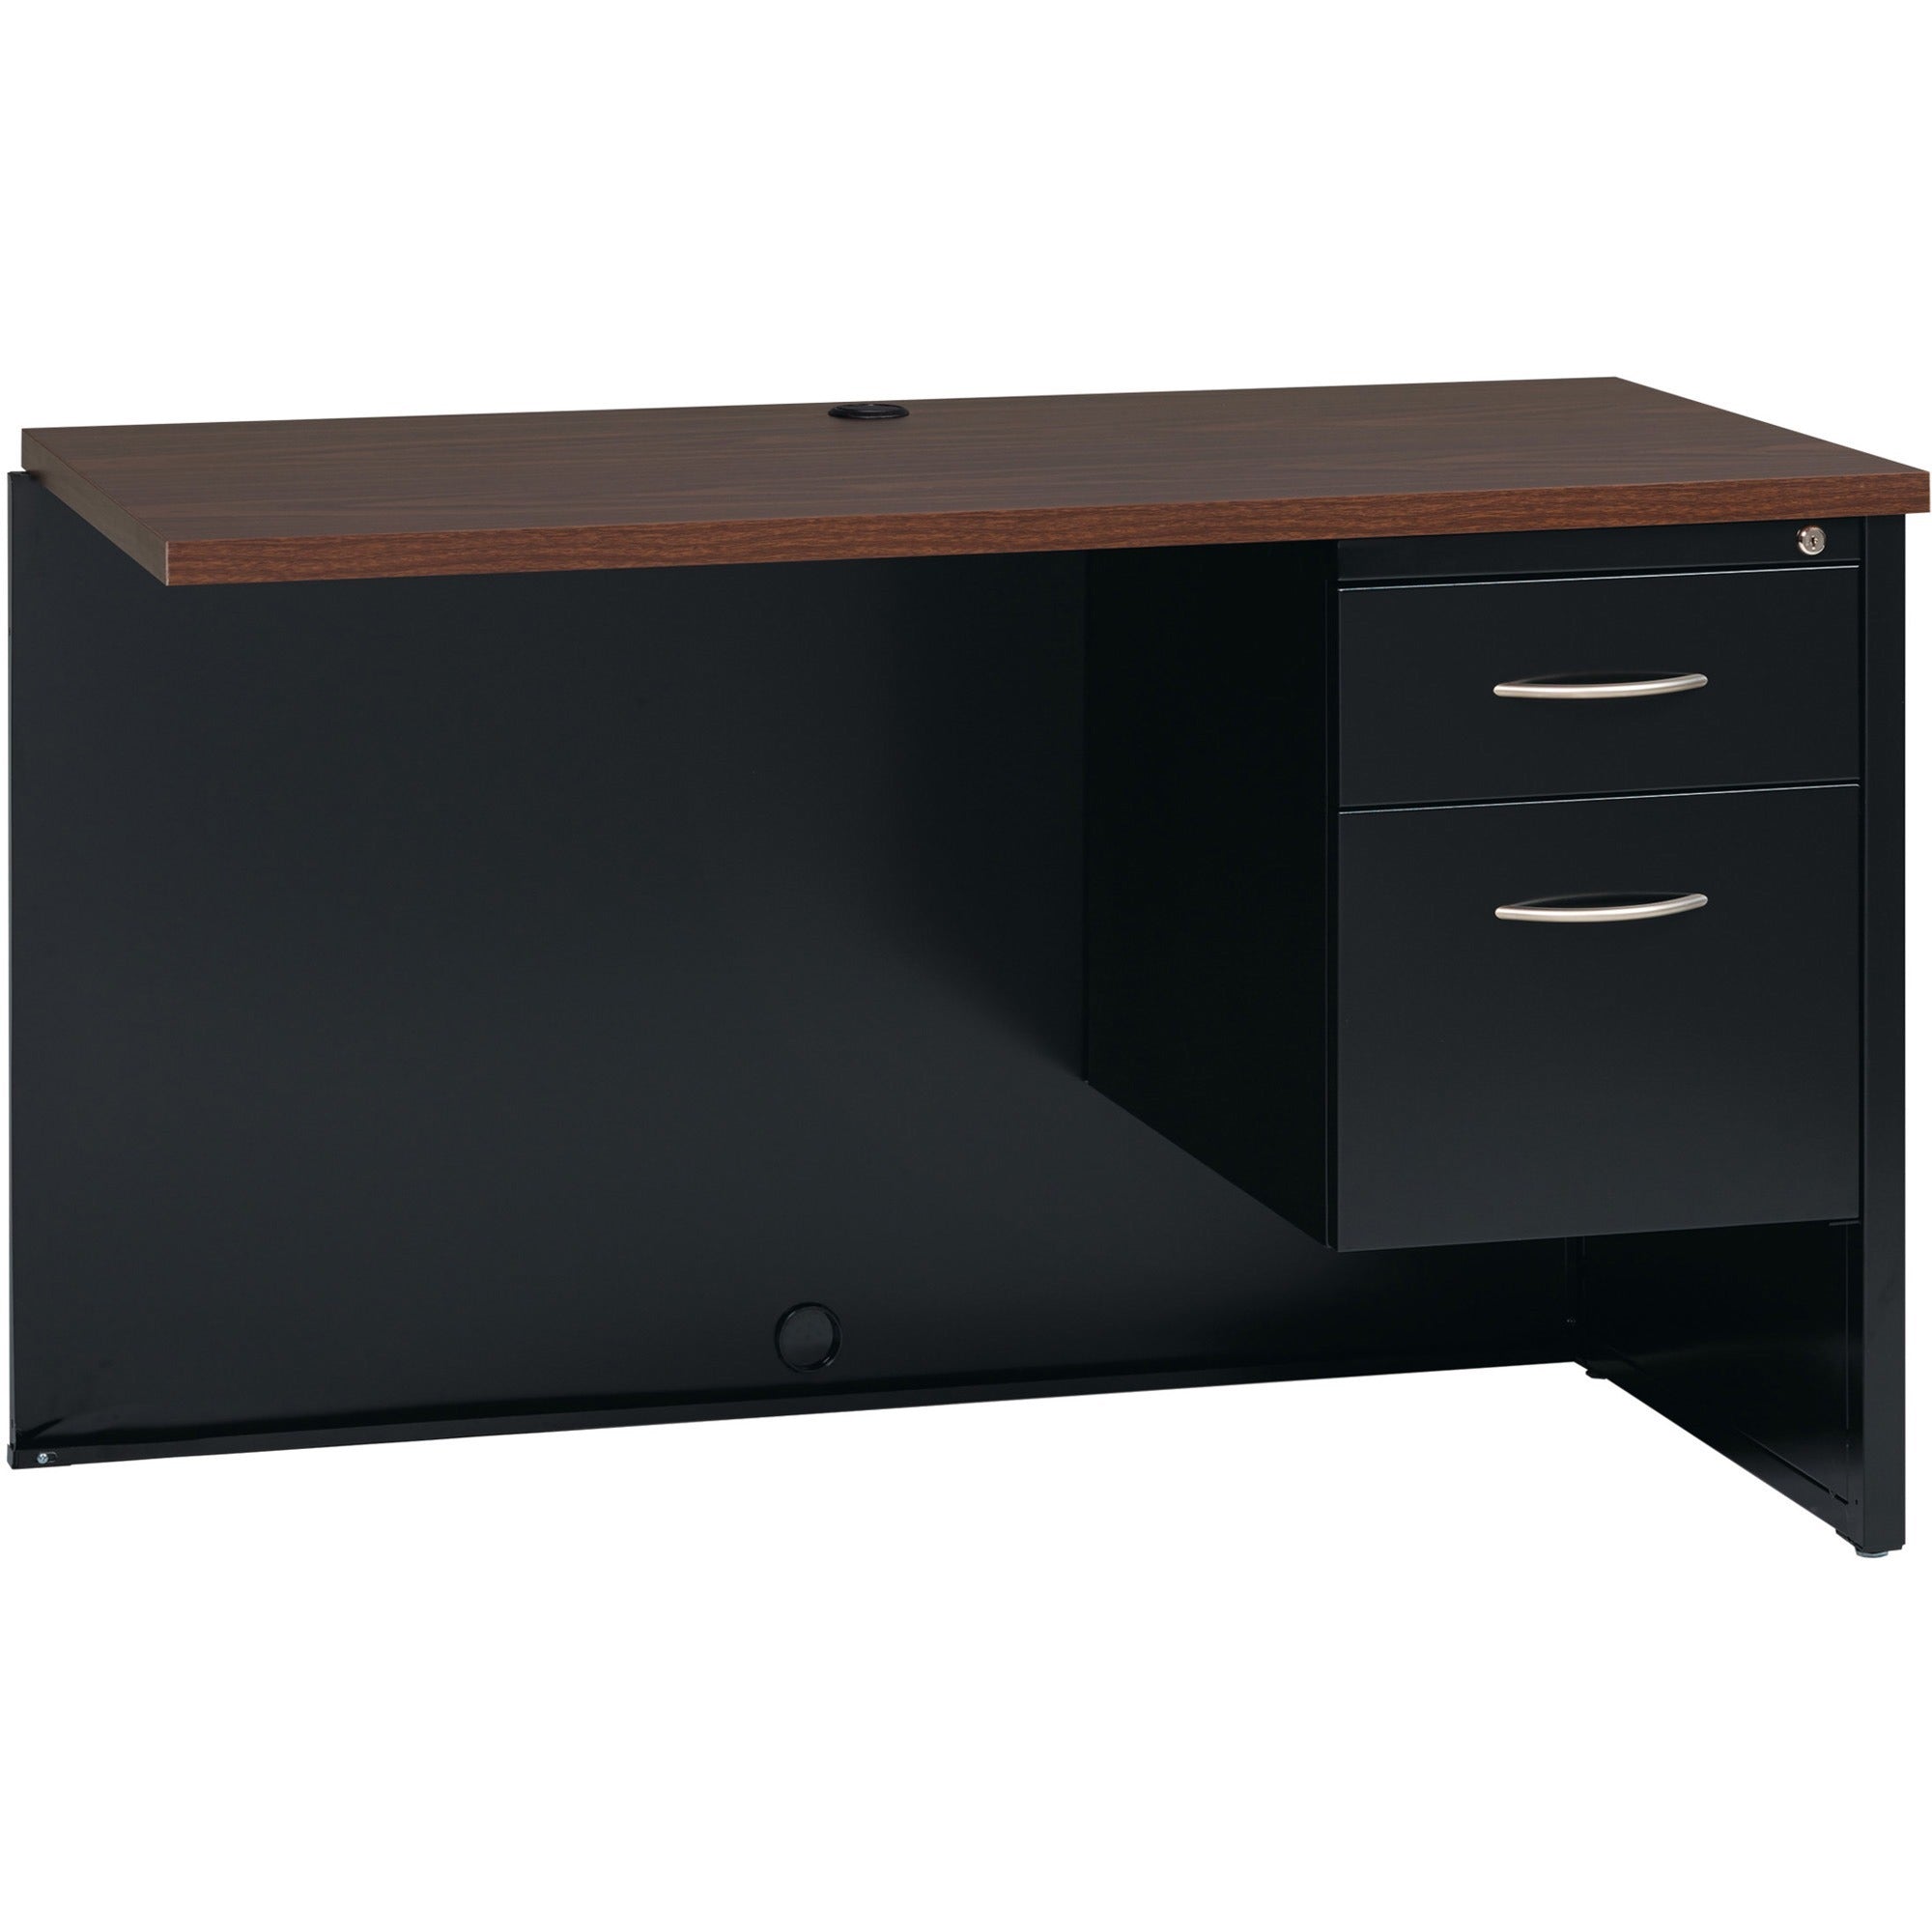 Lorell Fortress Modular Series Right Return - 48" x 24" , 1.1" Top - 2 x Box, File Drawer(s) - Single Pedestal on Right Side - Material: Steel - Finish: Walnut Laminate, Black - Scratch Resistant, Stain Resistant, Ball-bearing Suspension, Grommet, Ha - 1